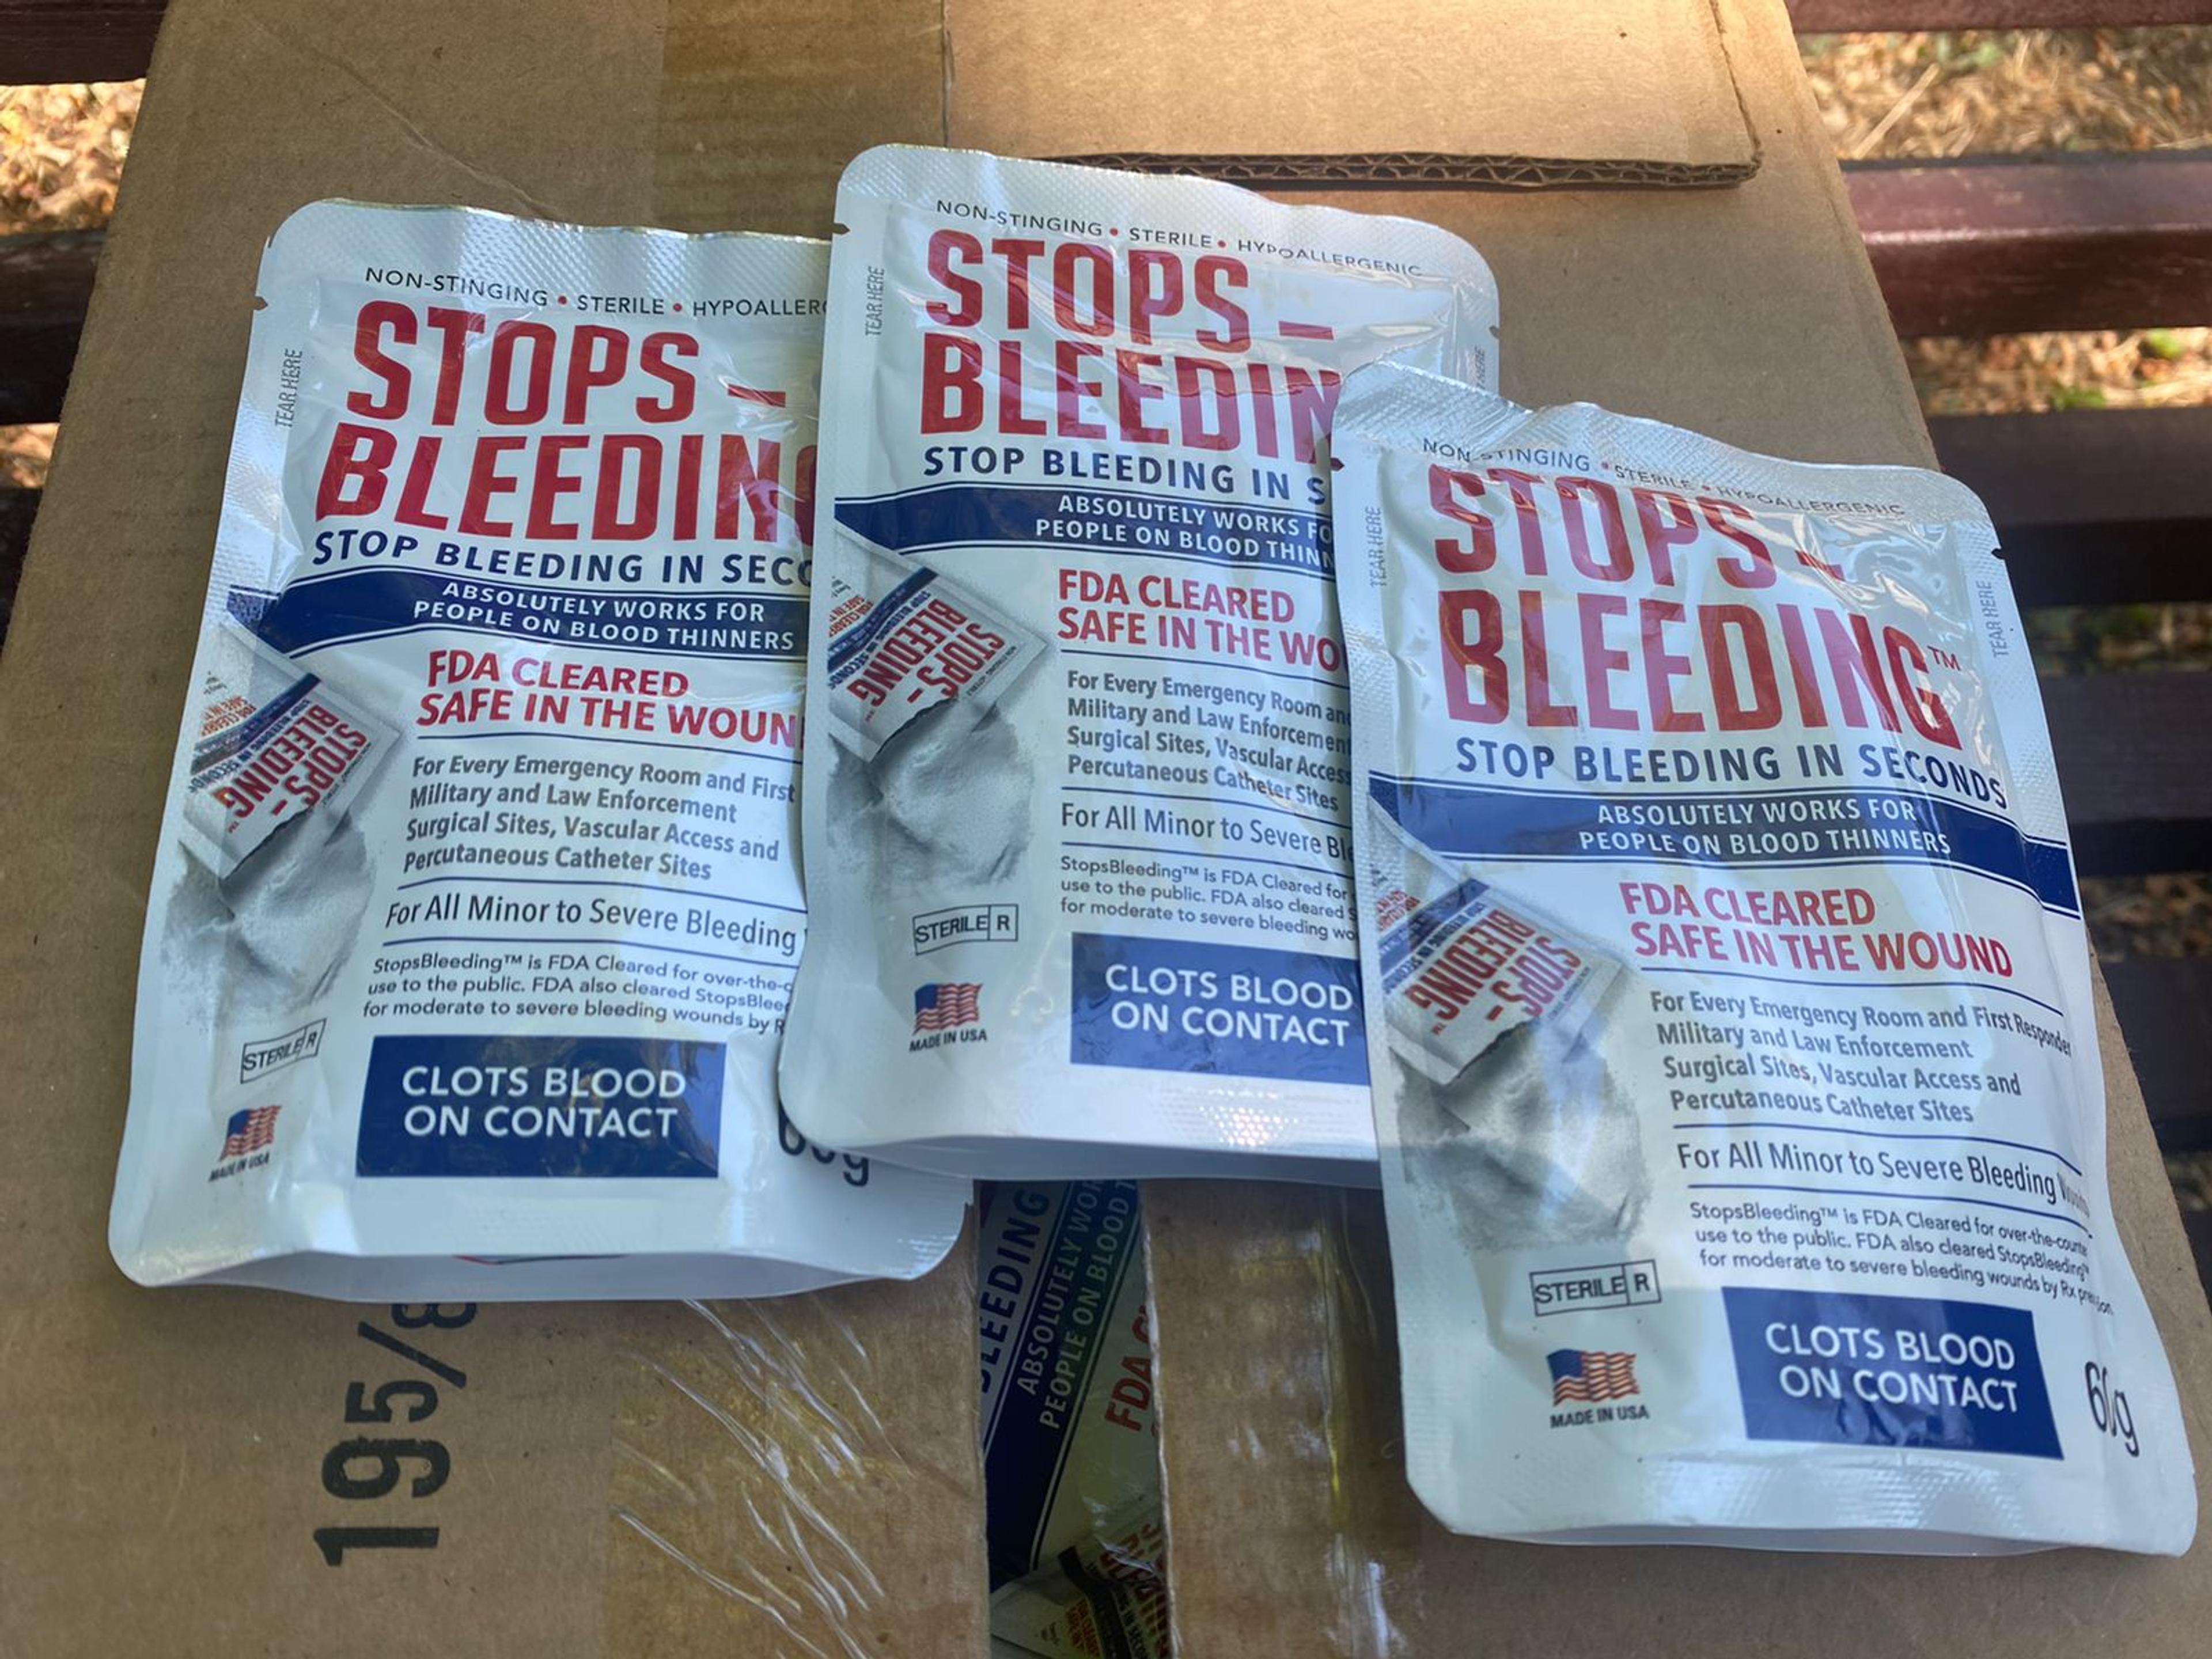 BleedStop Disinfects Wounds and Stops Bleeding from Minor Cuts to Large Bleeding Wounds